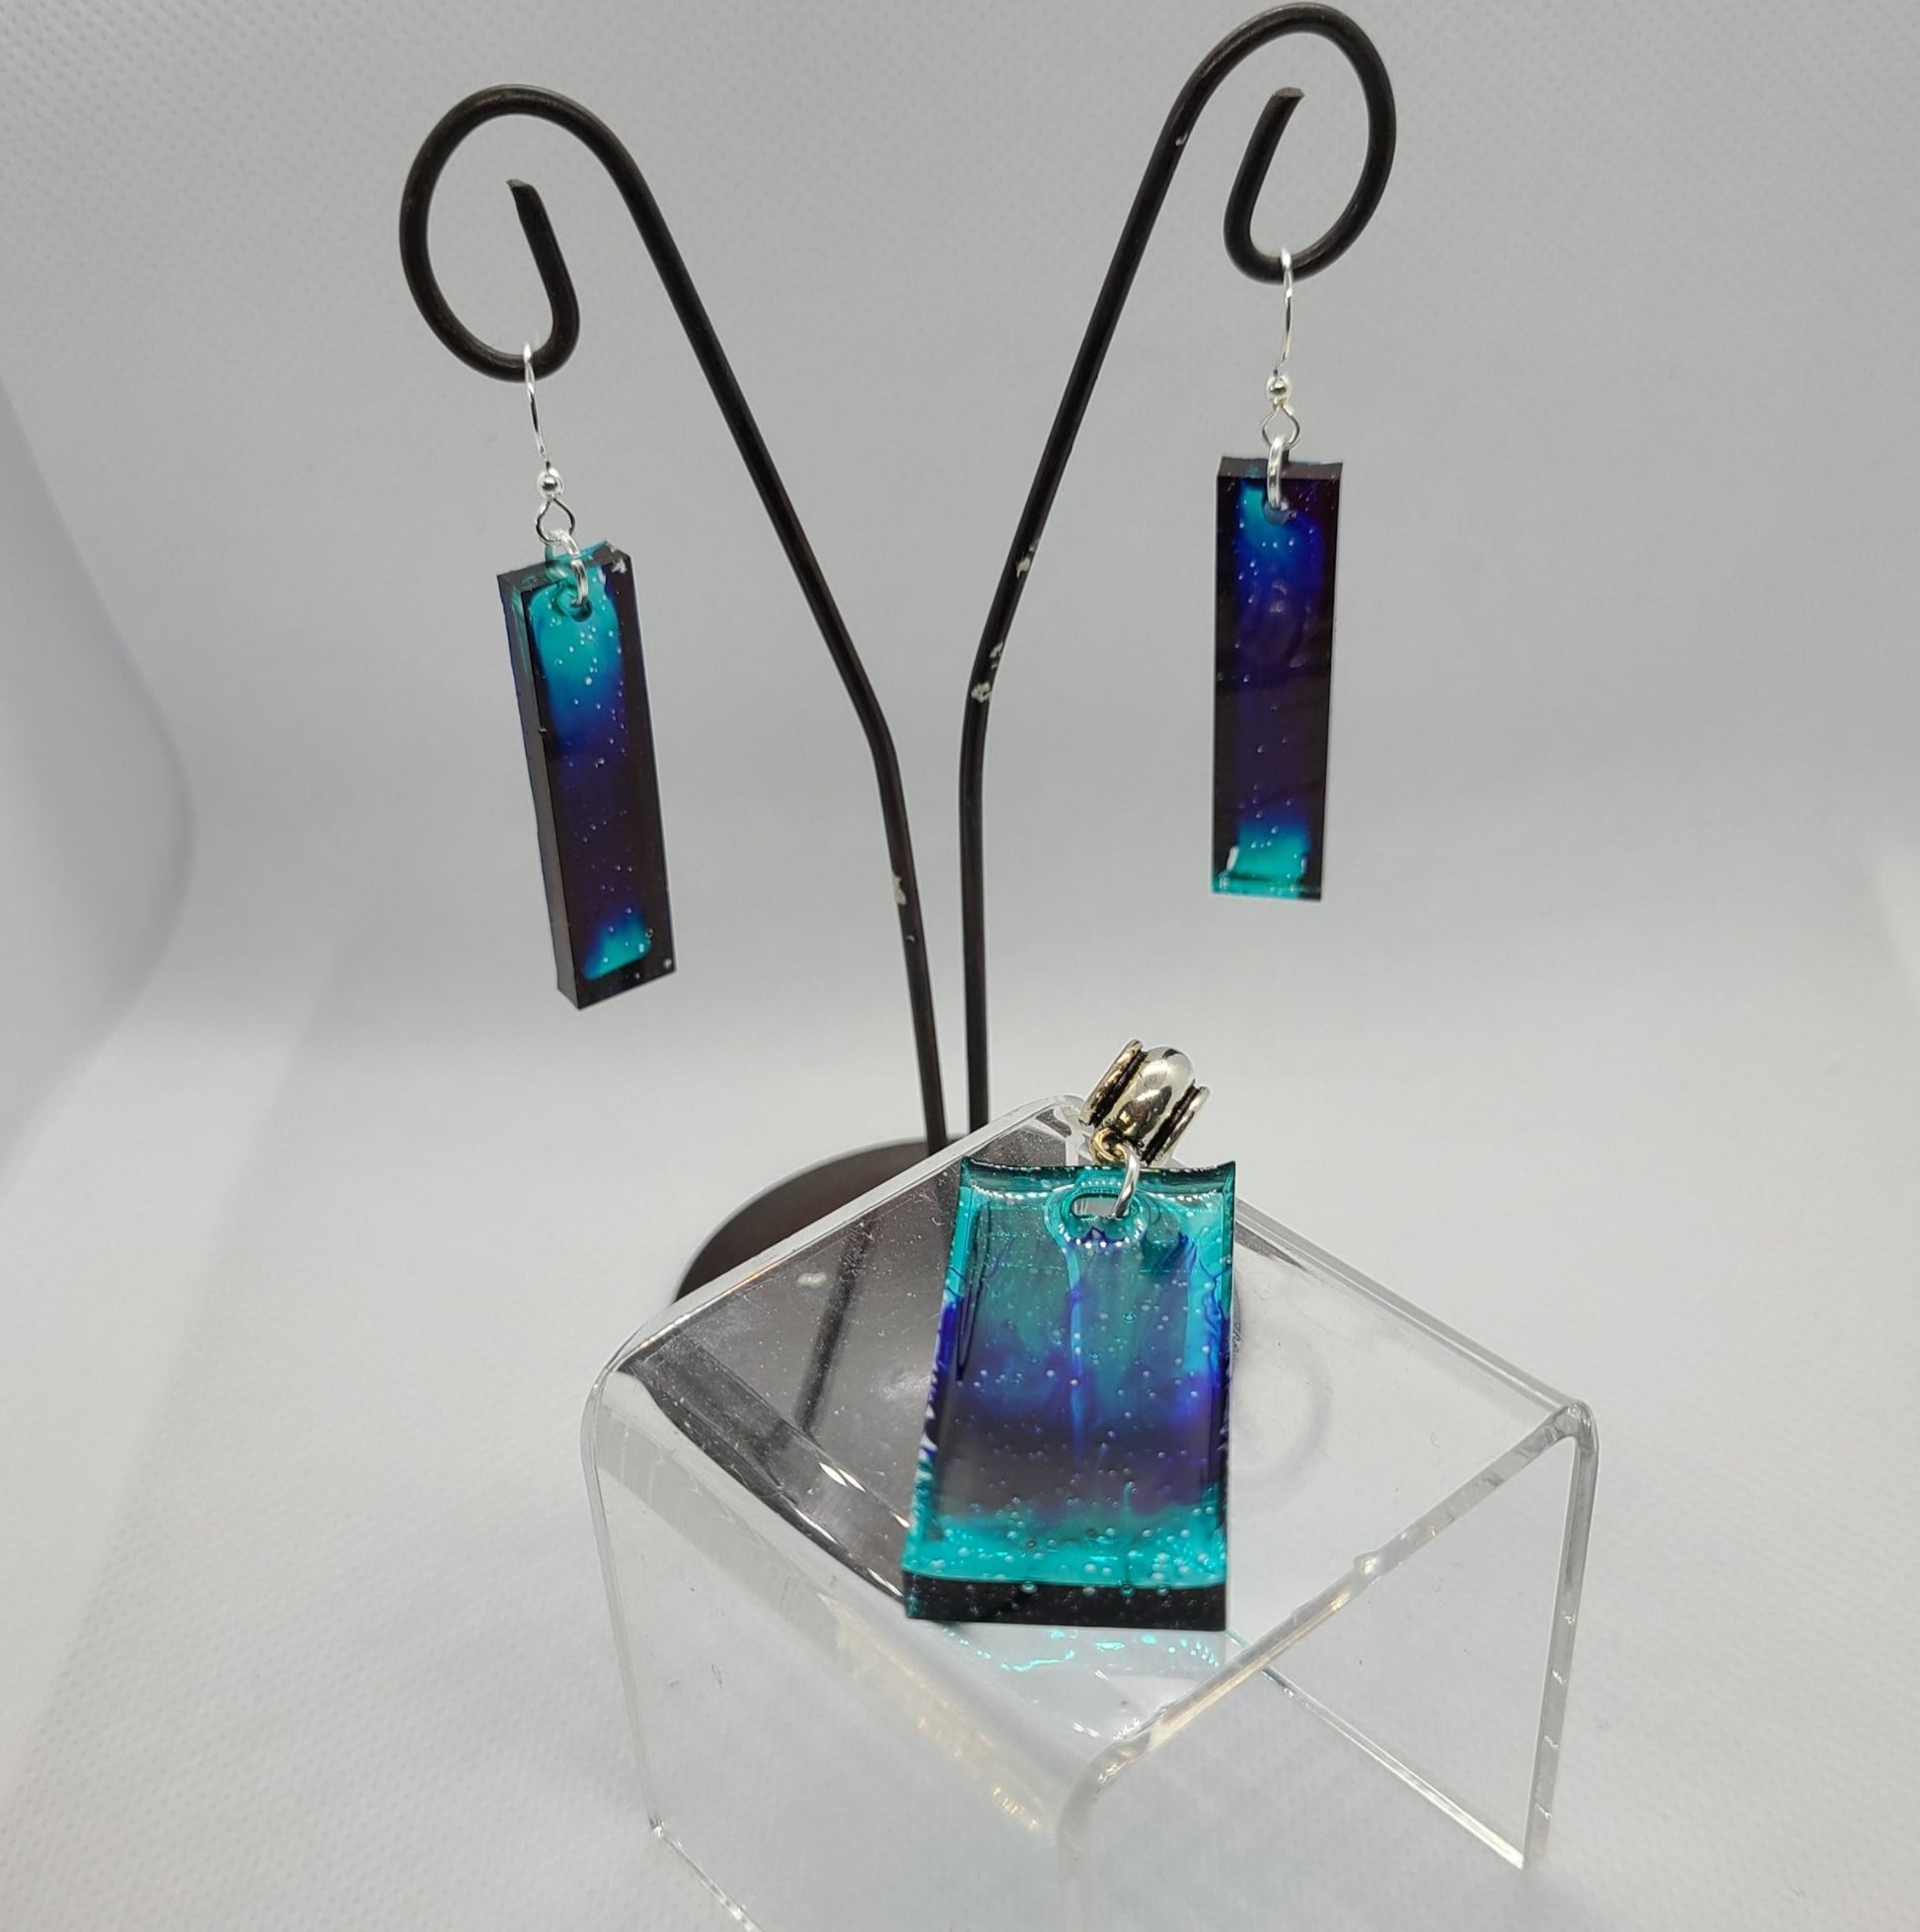 New! Created by me in Florida. Underwater scene, blue and green splashes of color and small bubbles Very Lightweight Set UV Resistant Resin Nickel Plated Silver Plated Earring Hooks French Hooks Bail on Pendant is a nice size for a leather, rubber or chain necklace Approximate size: Earrings-2.25 inches long as they hang; Pendant (Including bail) 2 inches